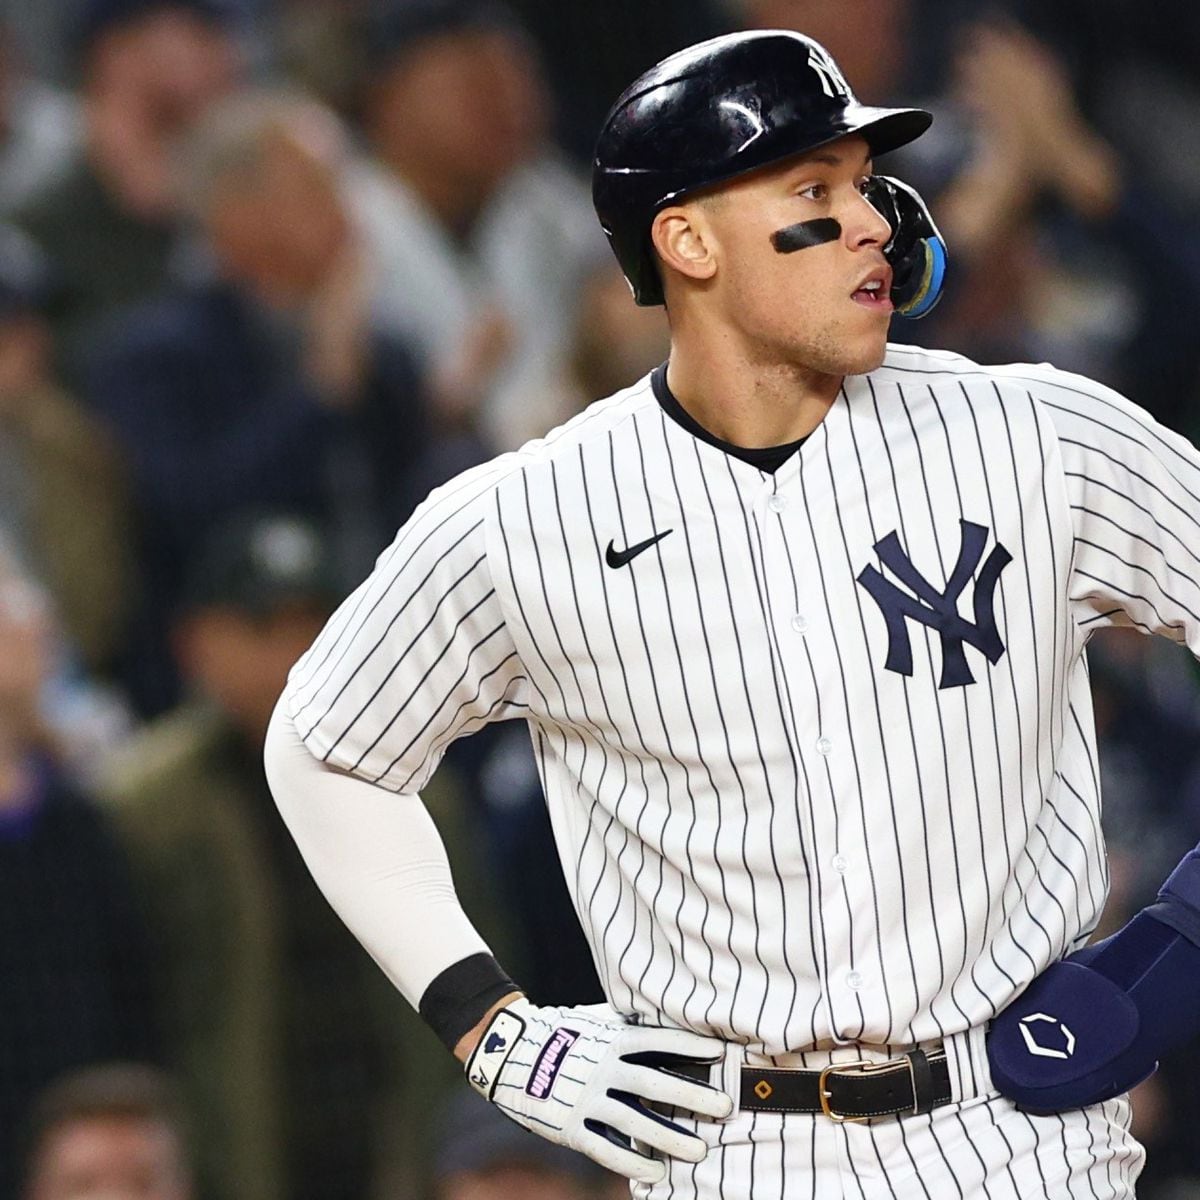 Re-signing Aaron Judge is the bare minimum for the Yankees this